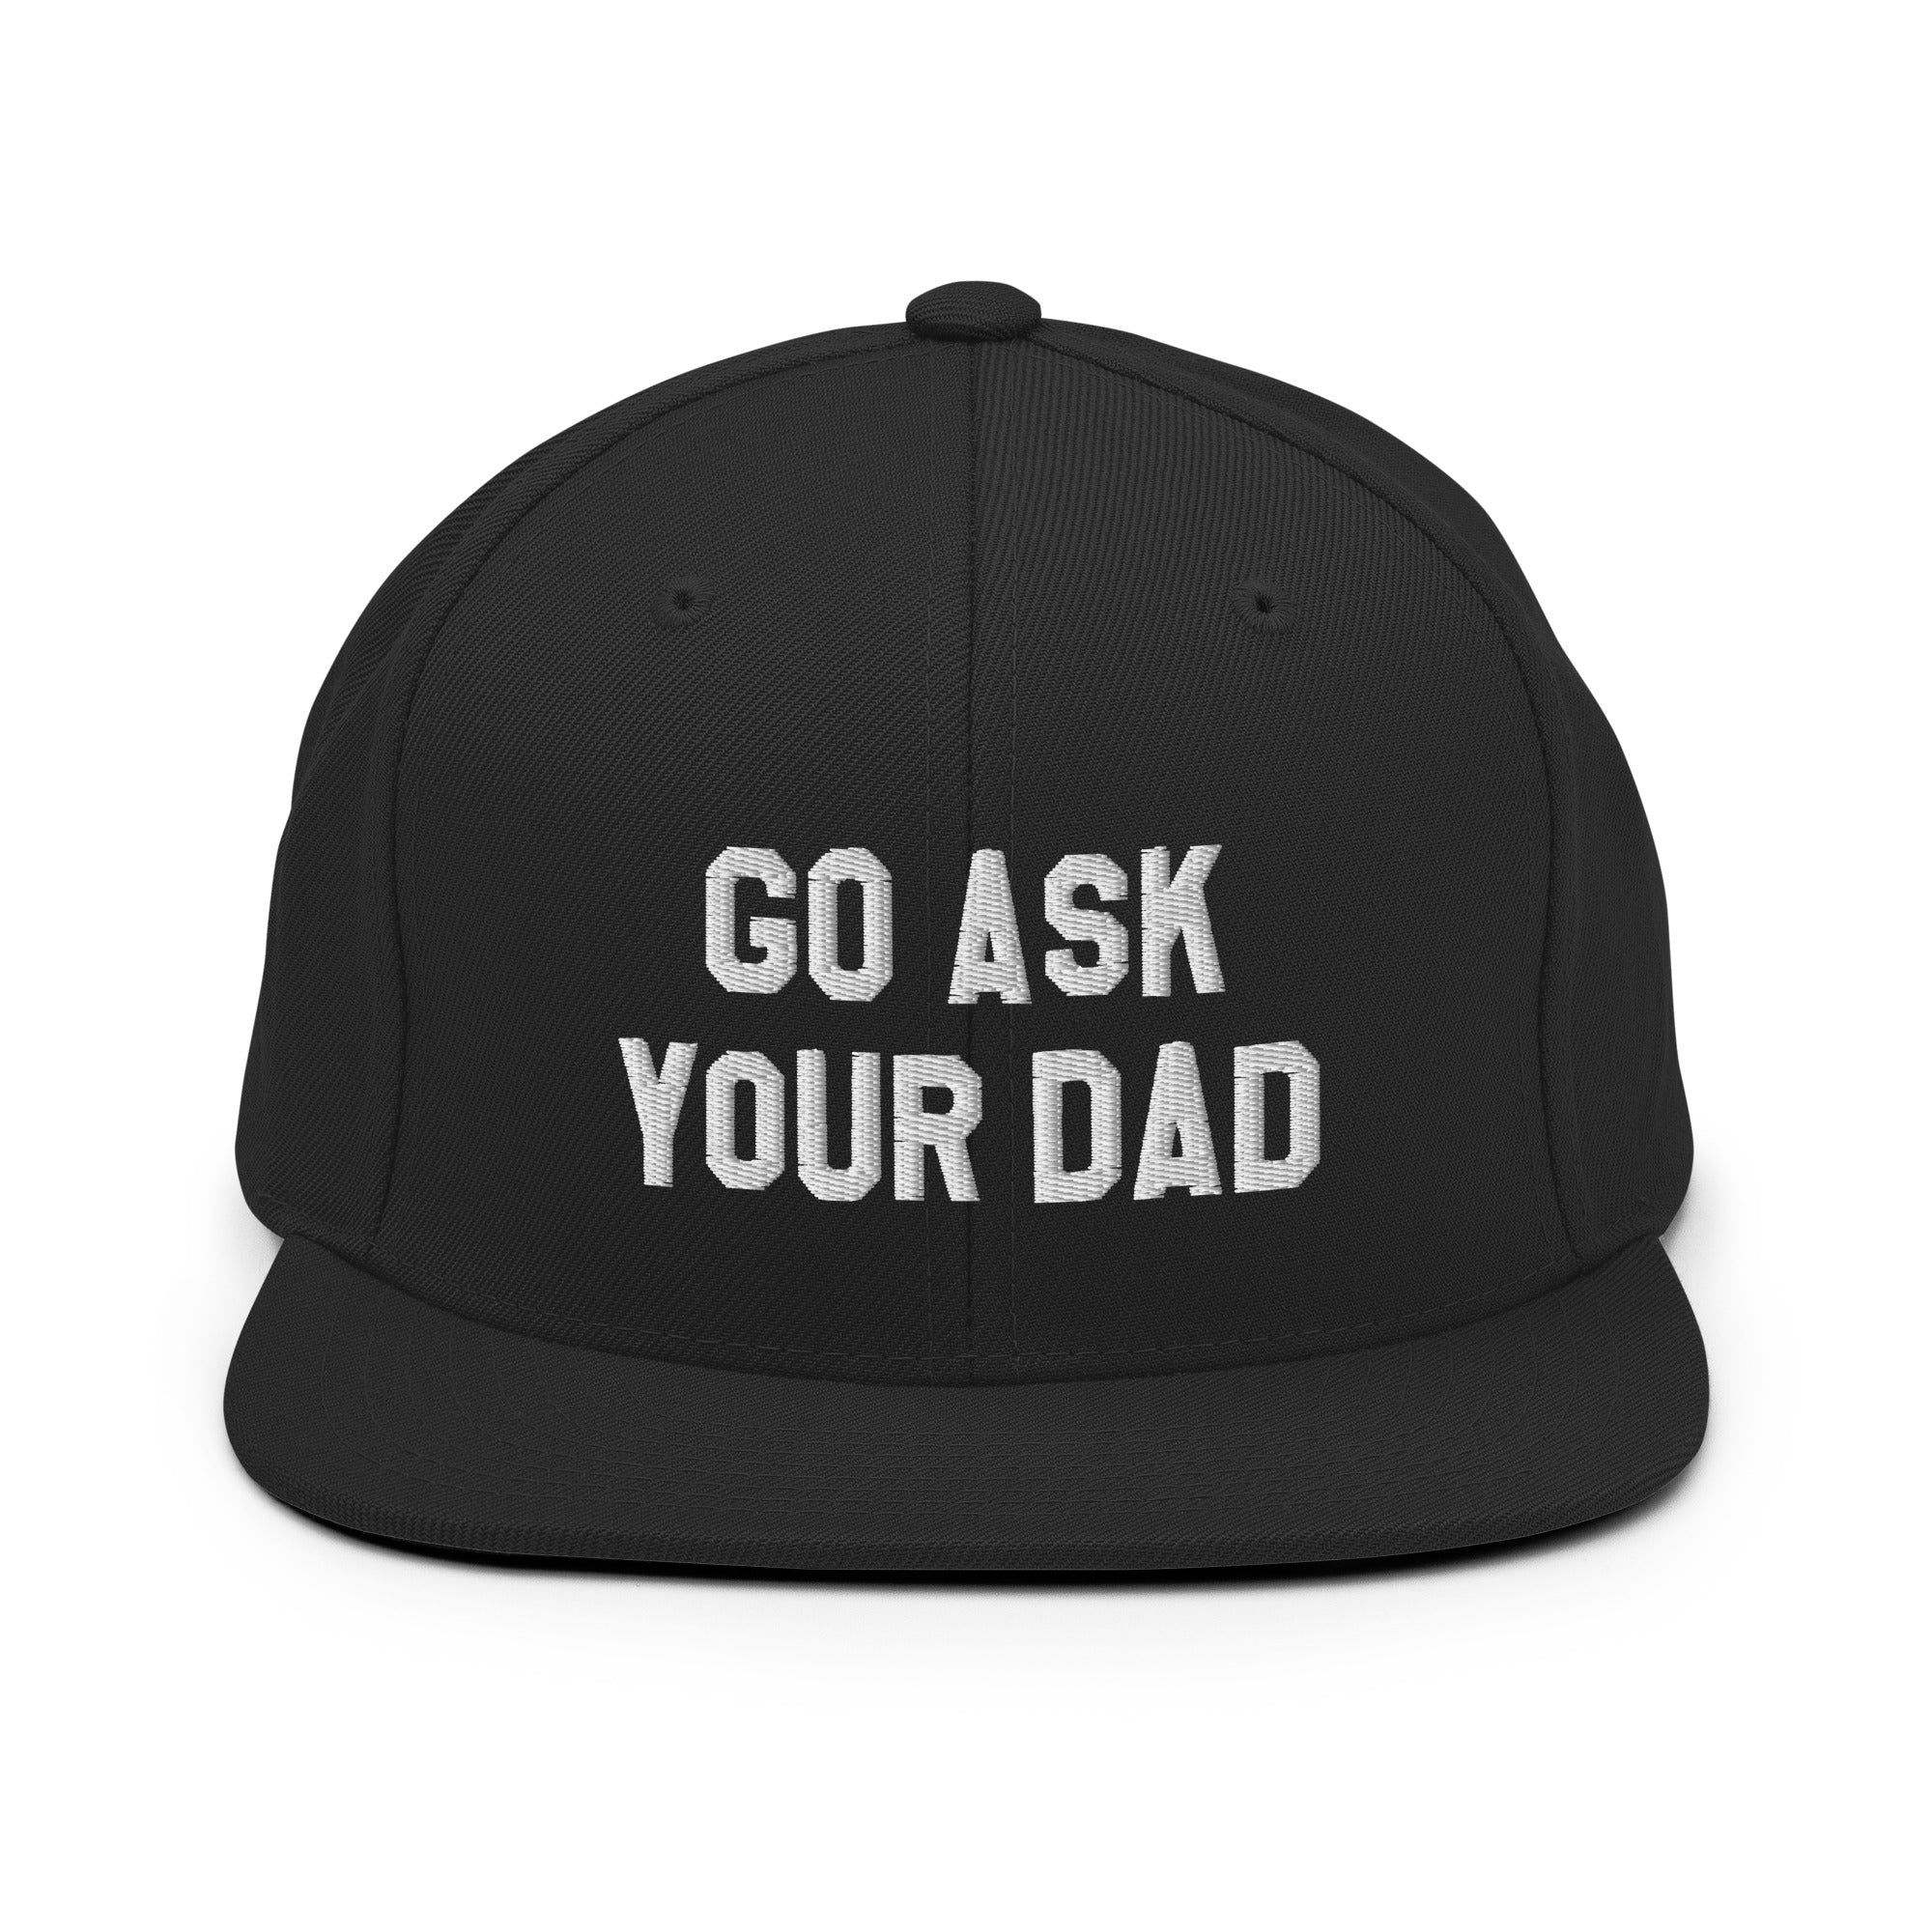 Go Ask Your Dad - Snapback Hat